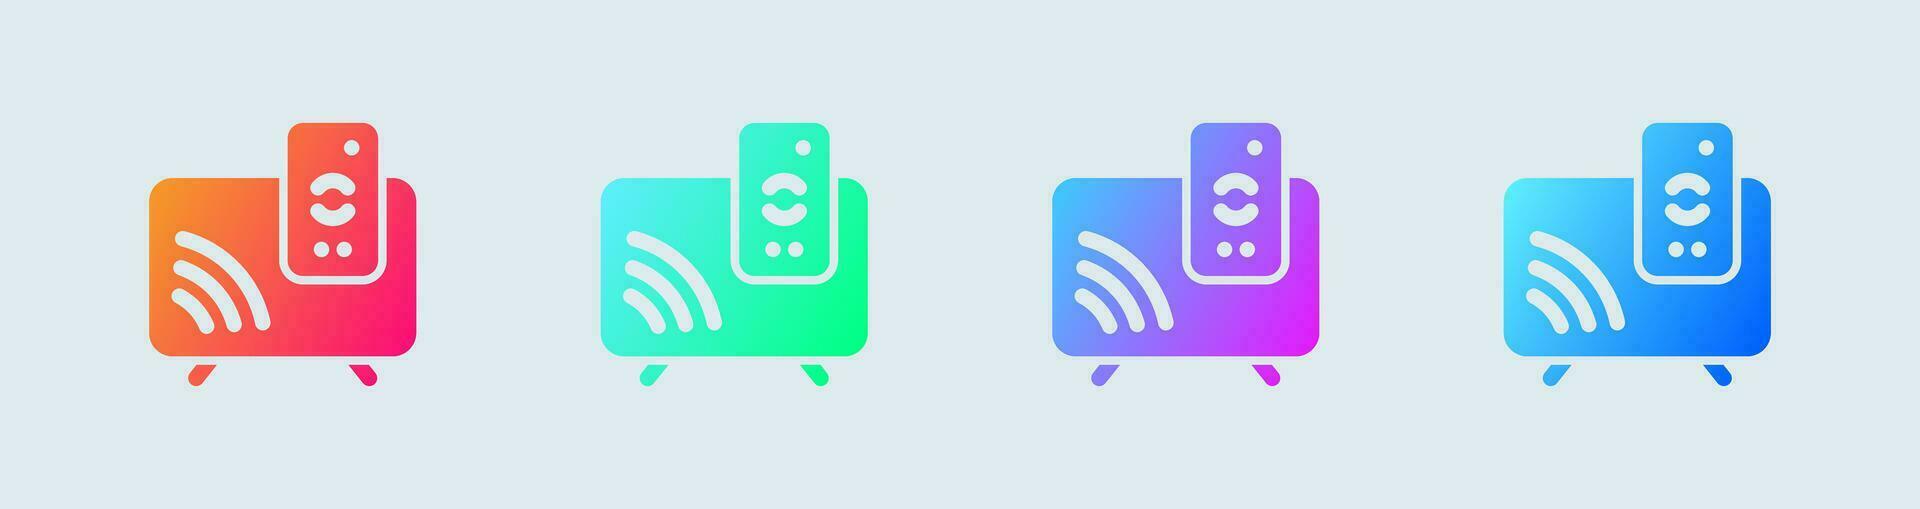 Smart television solid icon in gradient colors. Display signs vector illustration.